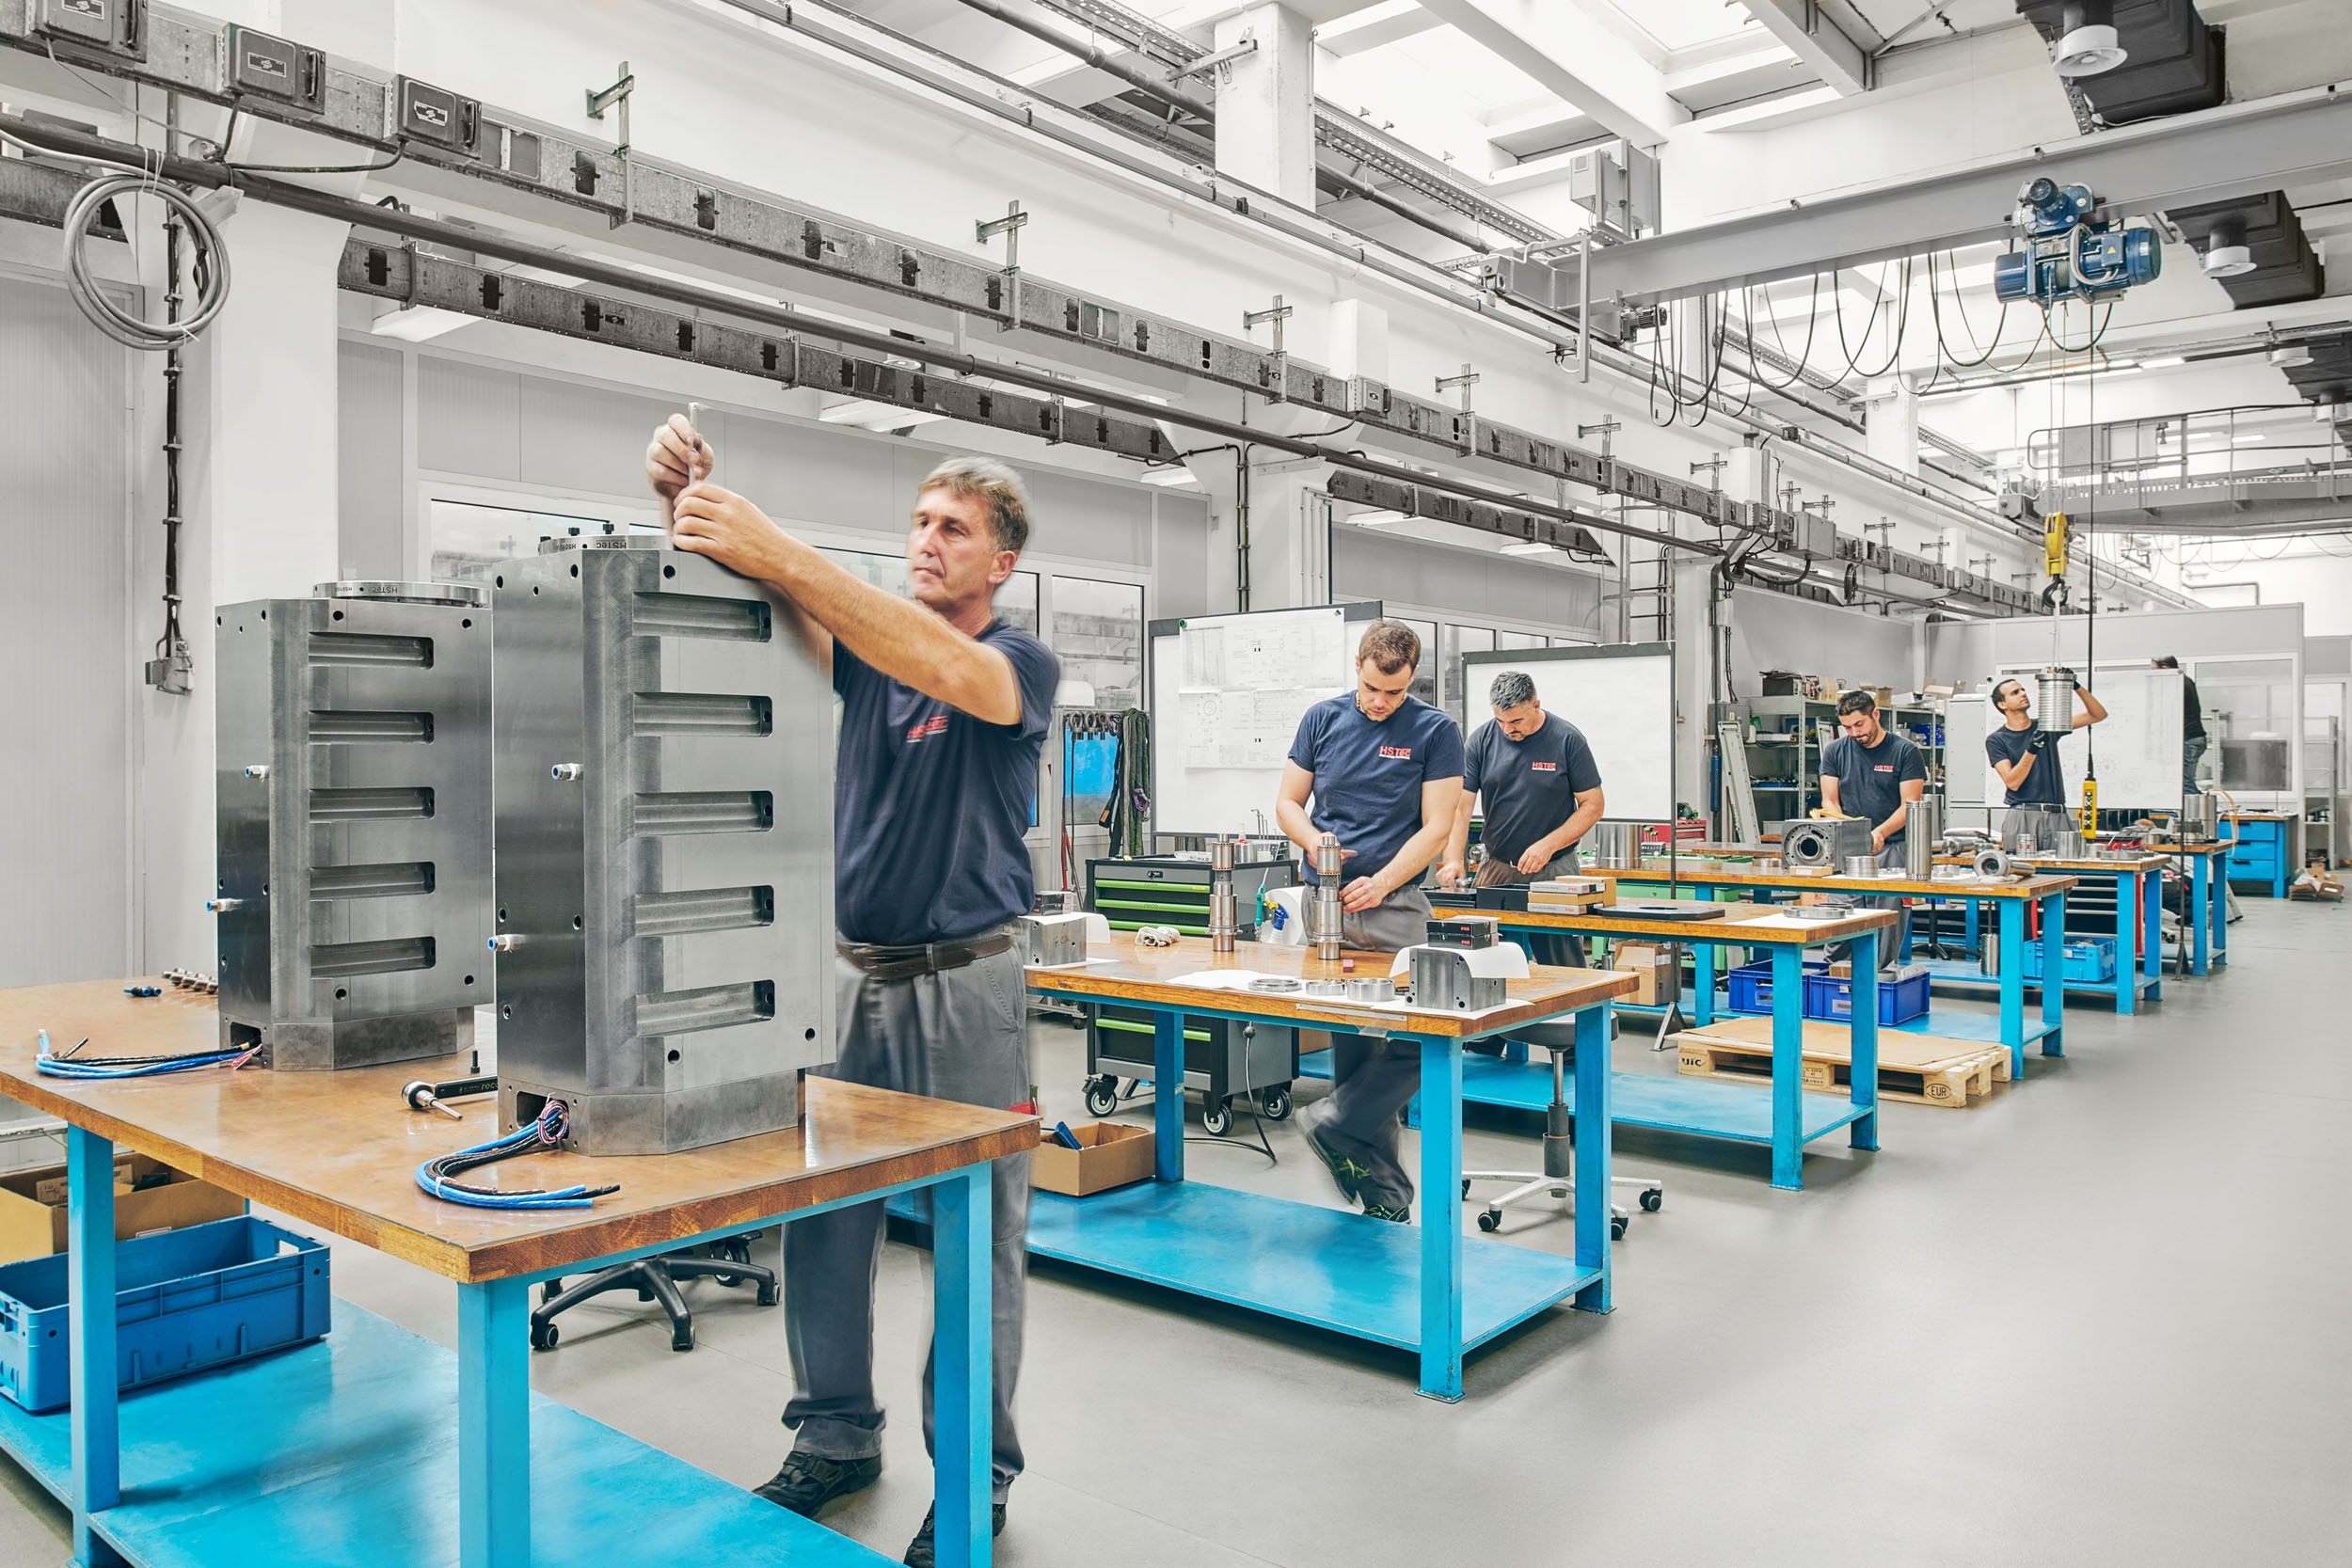 Since August 2022, the CHIRON Group has had more than 100 new employees at its Croatian site in Zadar, along with a new motor spindle and clamping device brand in its portfolio in the form of HSTEC.